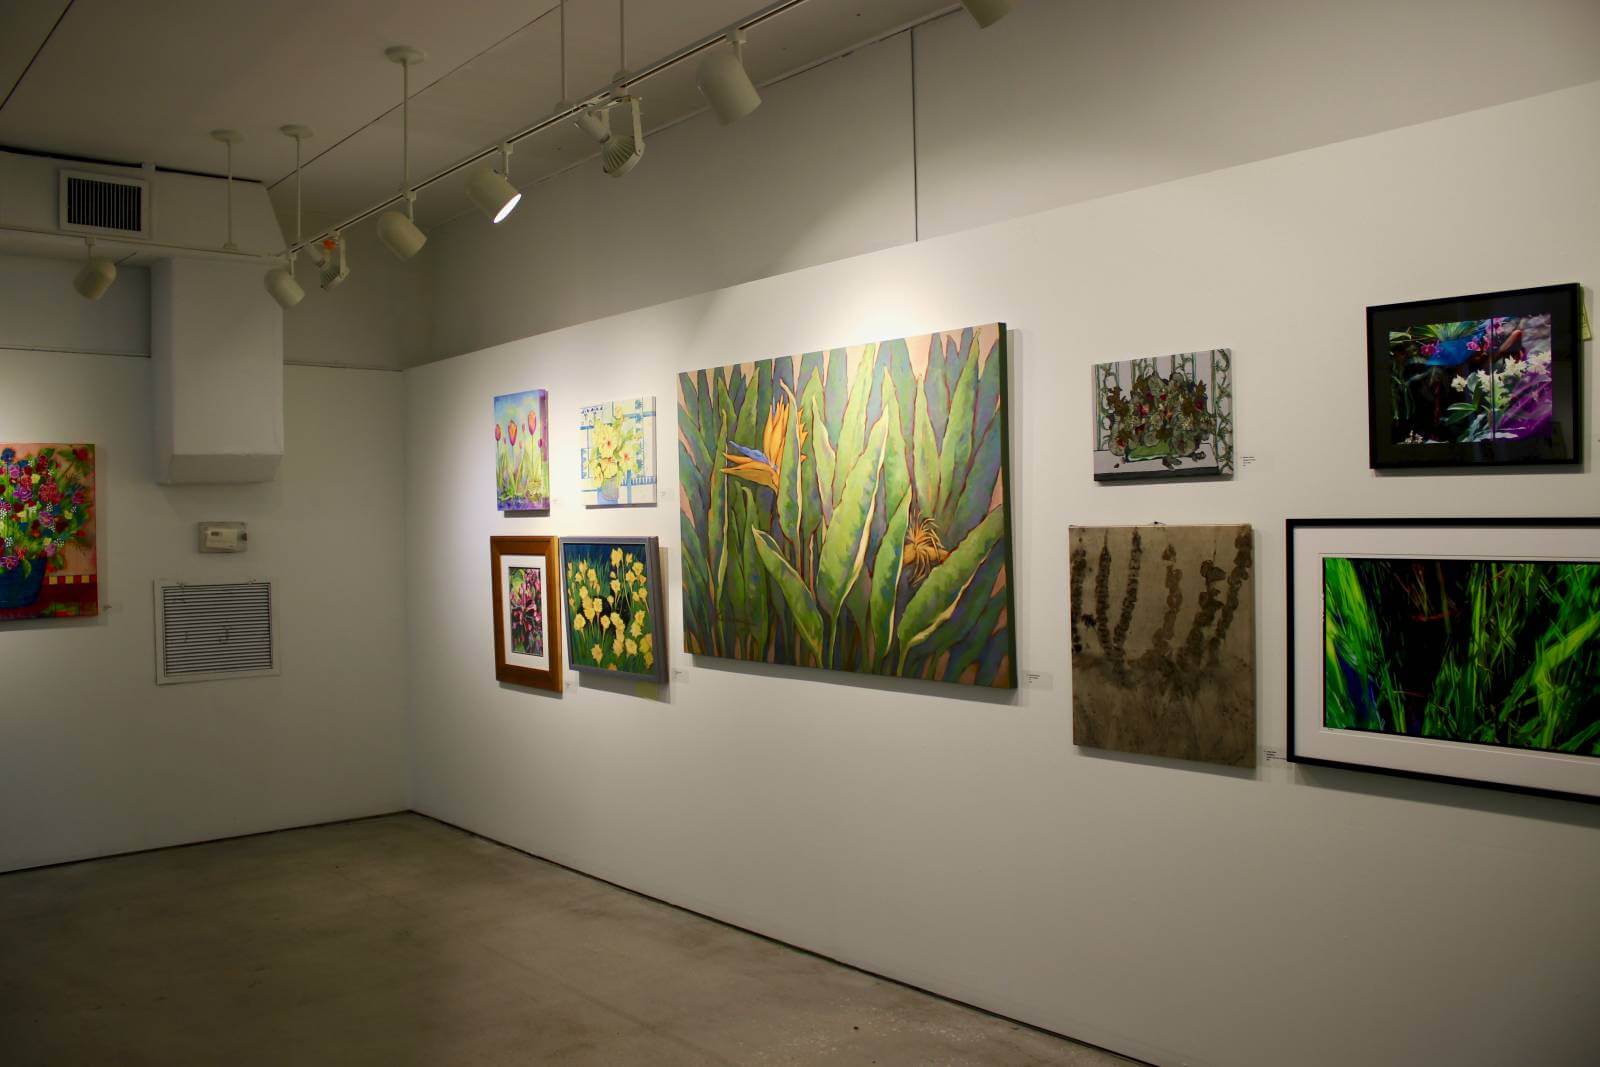 Art Center Sarasota in Sarasota, Florida is a community art center with exhibition galleries, a sculpture garden, adult and kids art classes, programs, and workshops. Must Do Visitor Guides | MustDo.com.